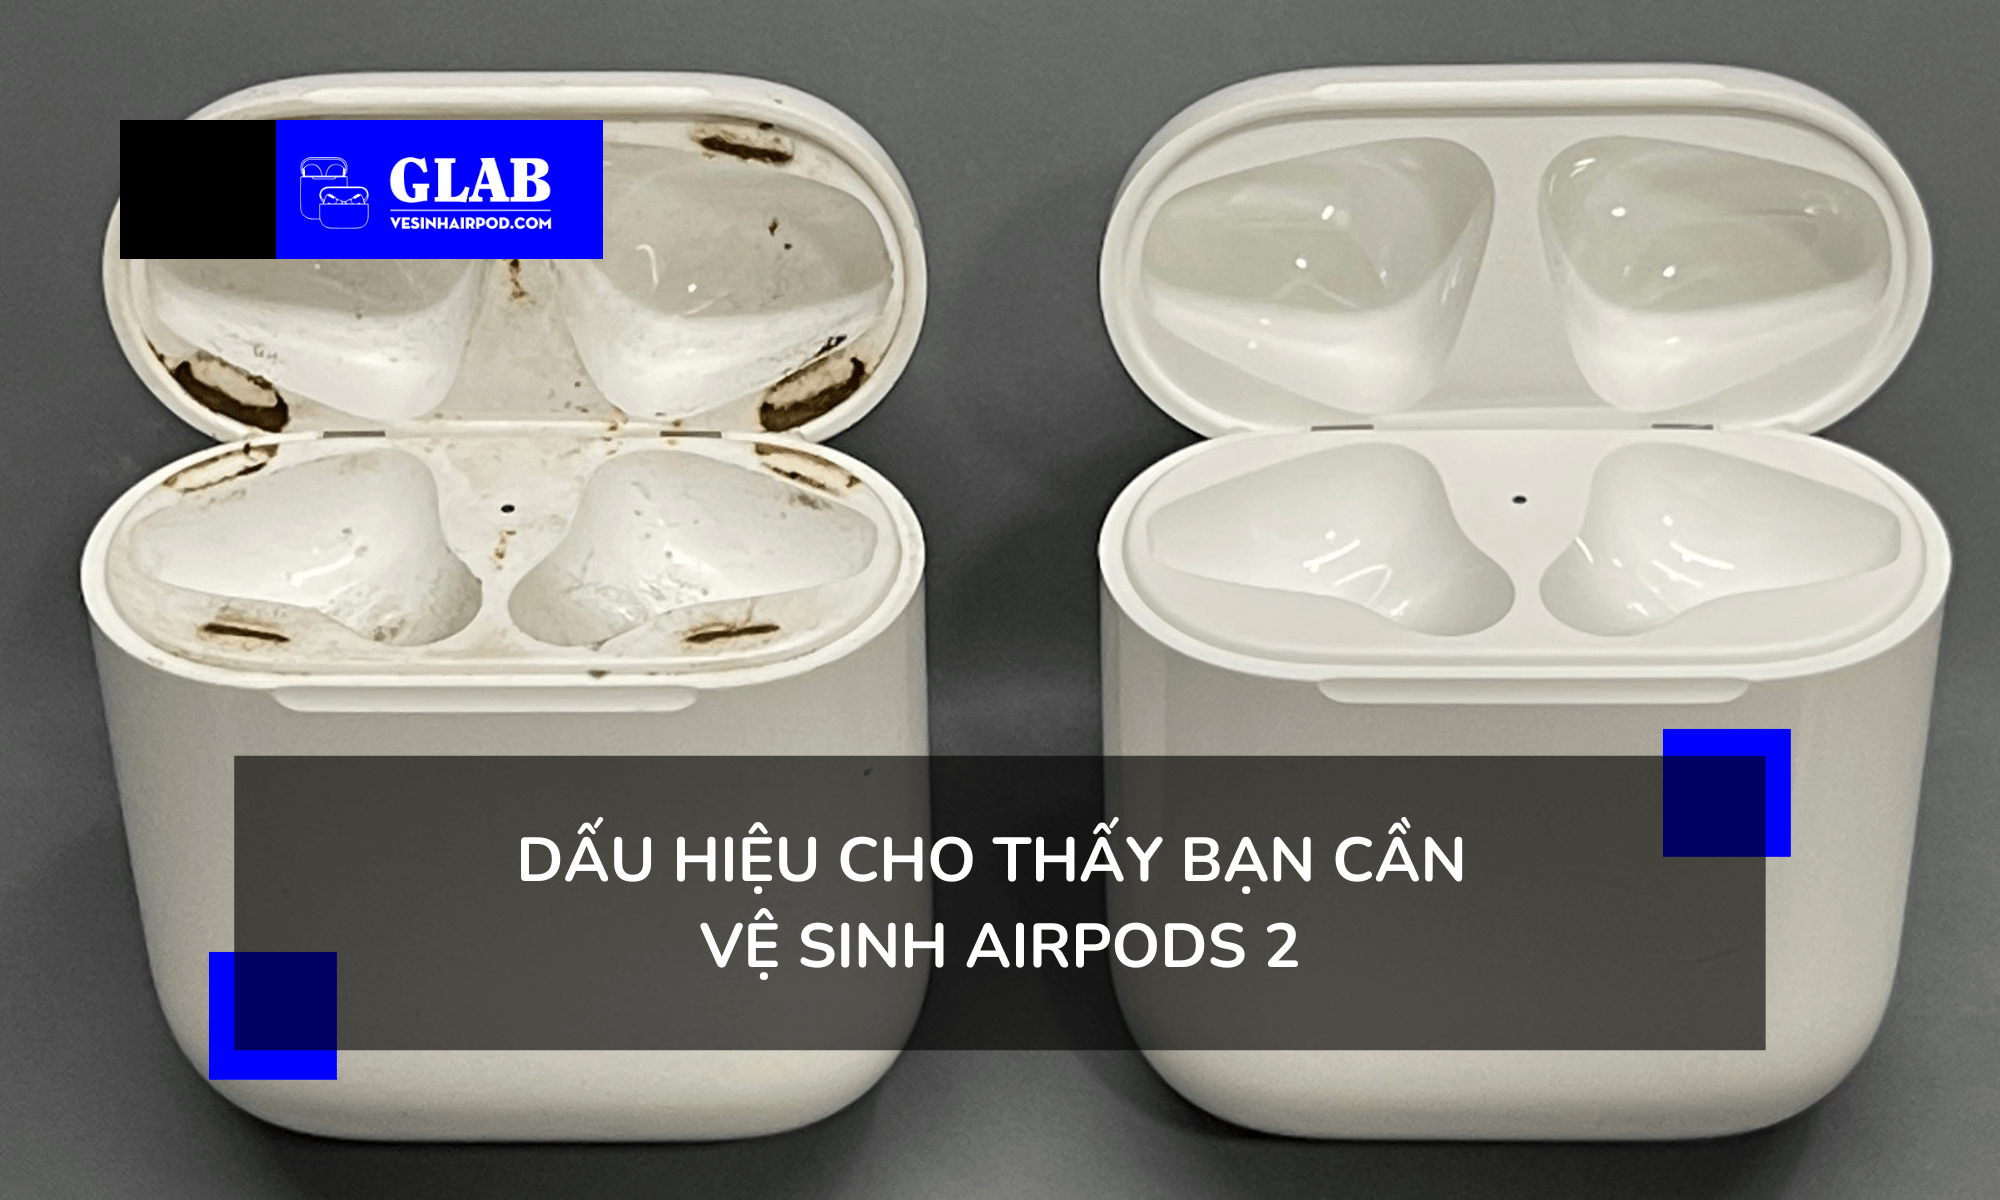 ve-sinh-airpods-2-chinh-hang 